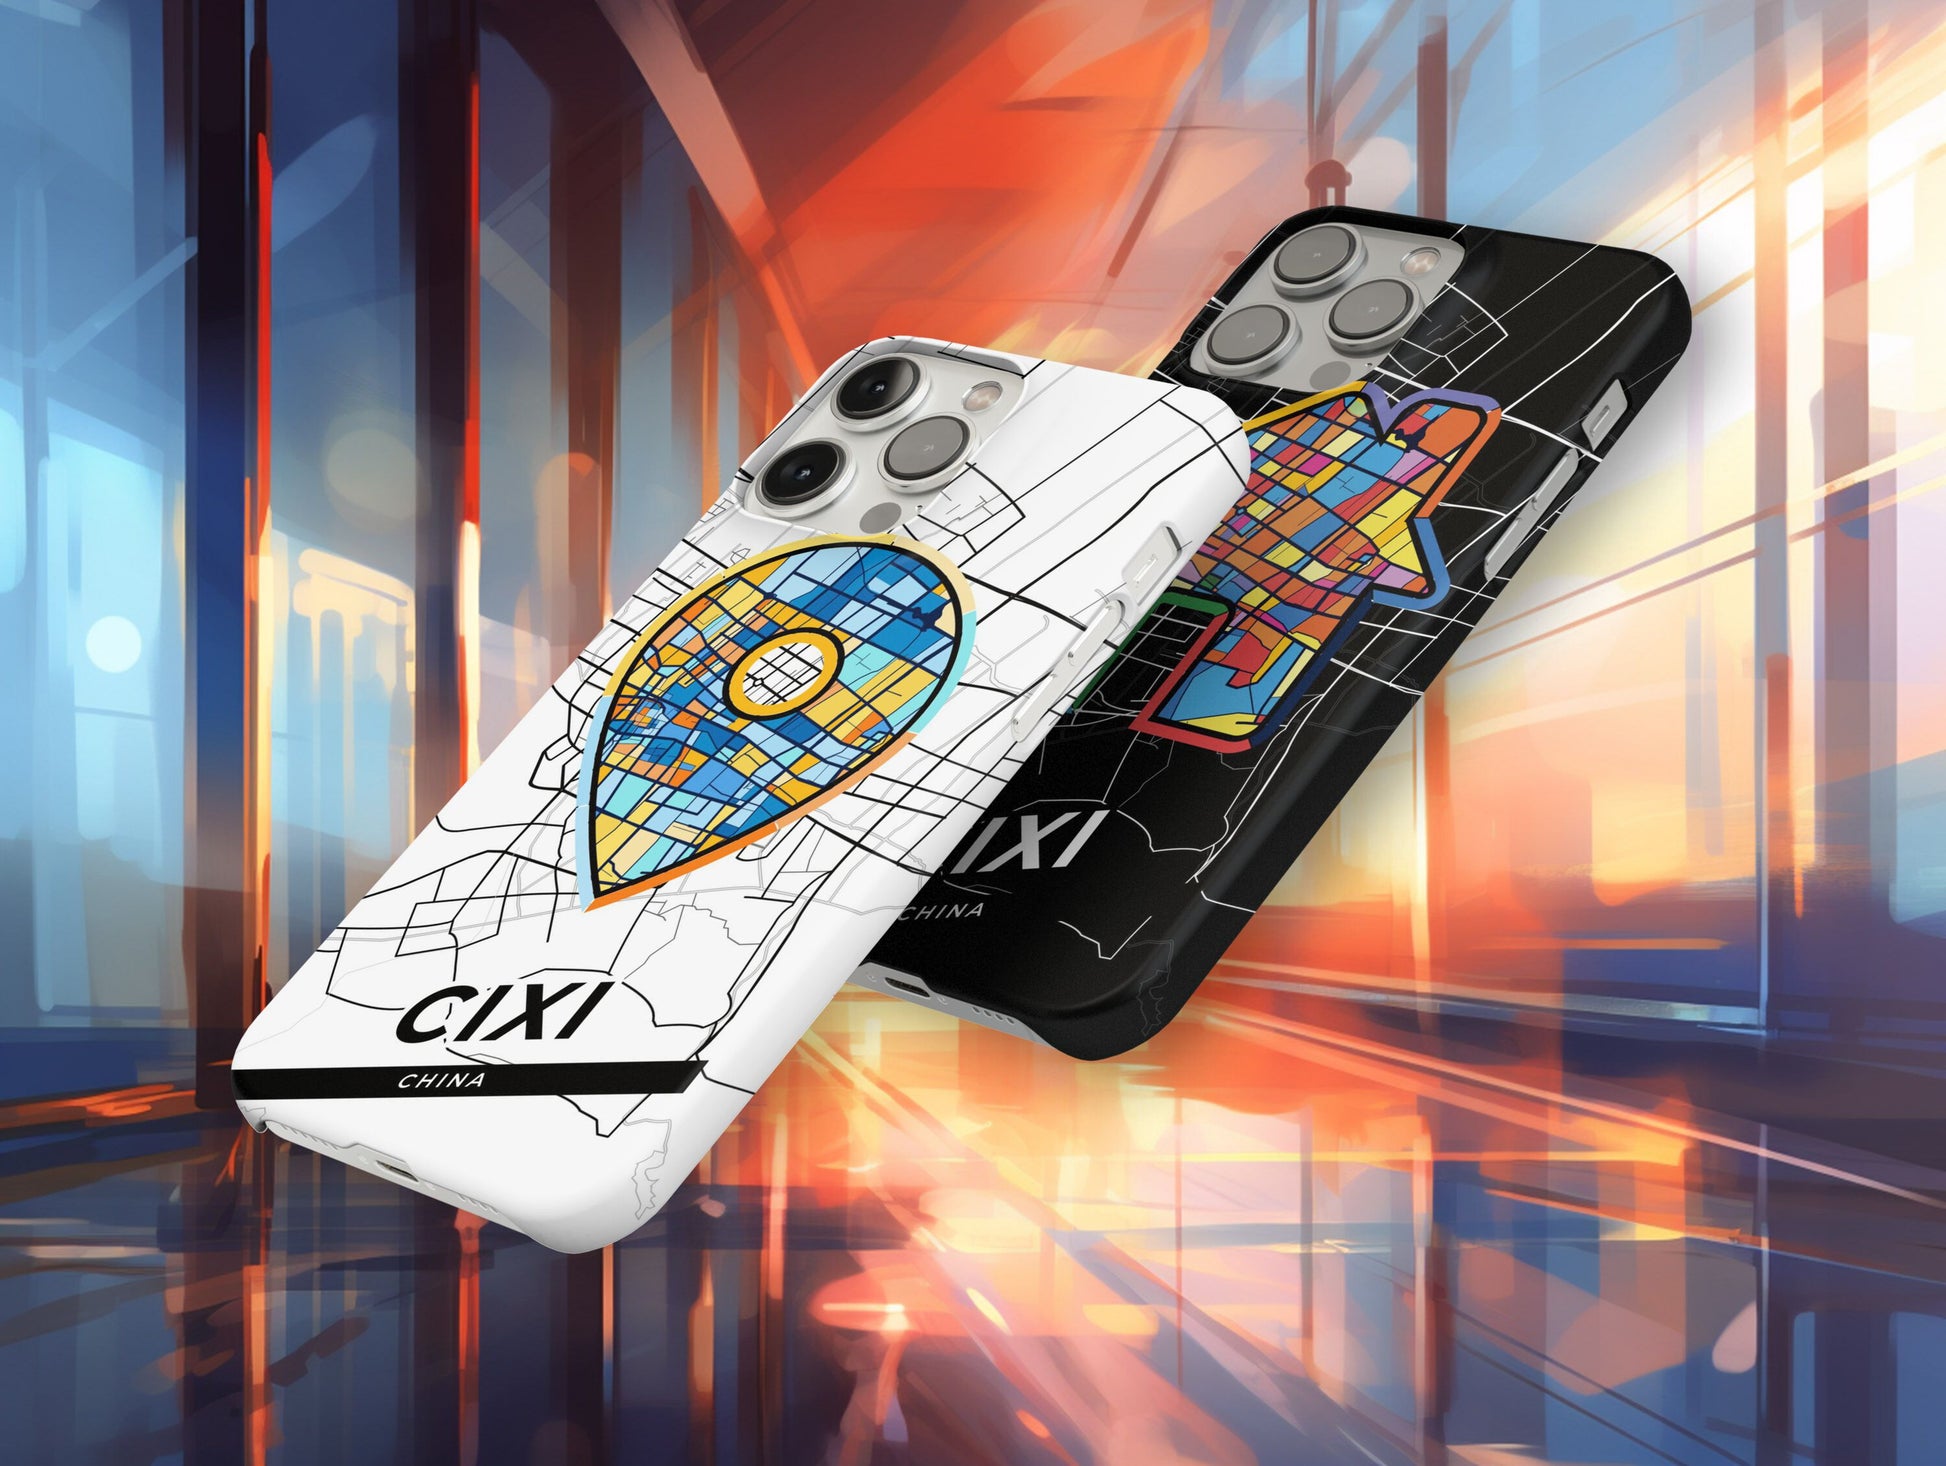 Cixi China slim phone case with colorful icon. Birthday, wedding or housewarming gift. Couple match cases.